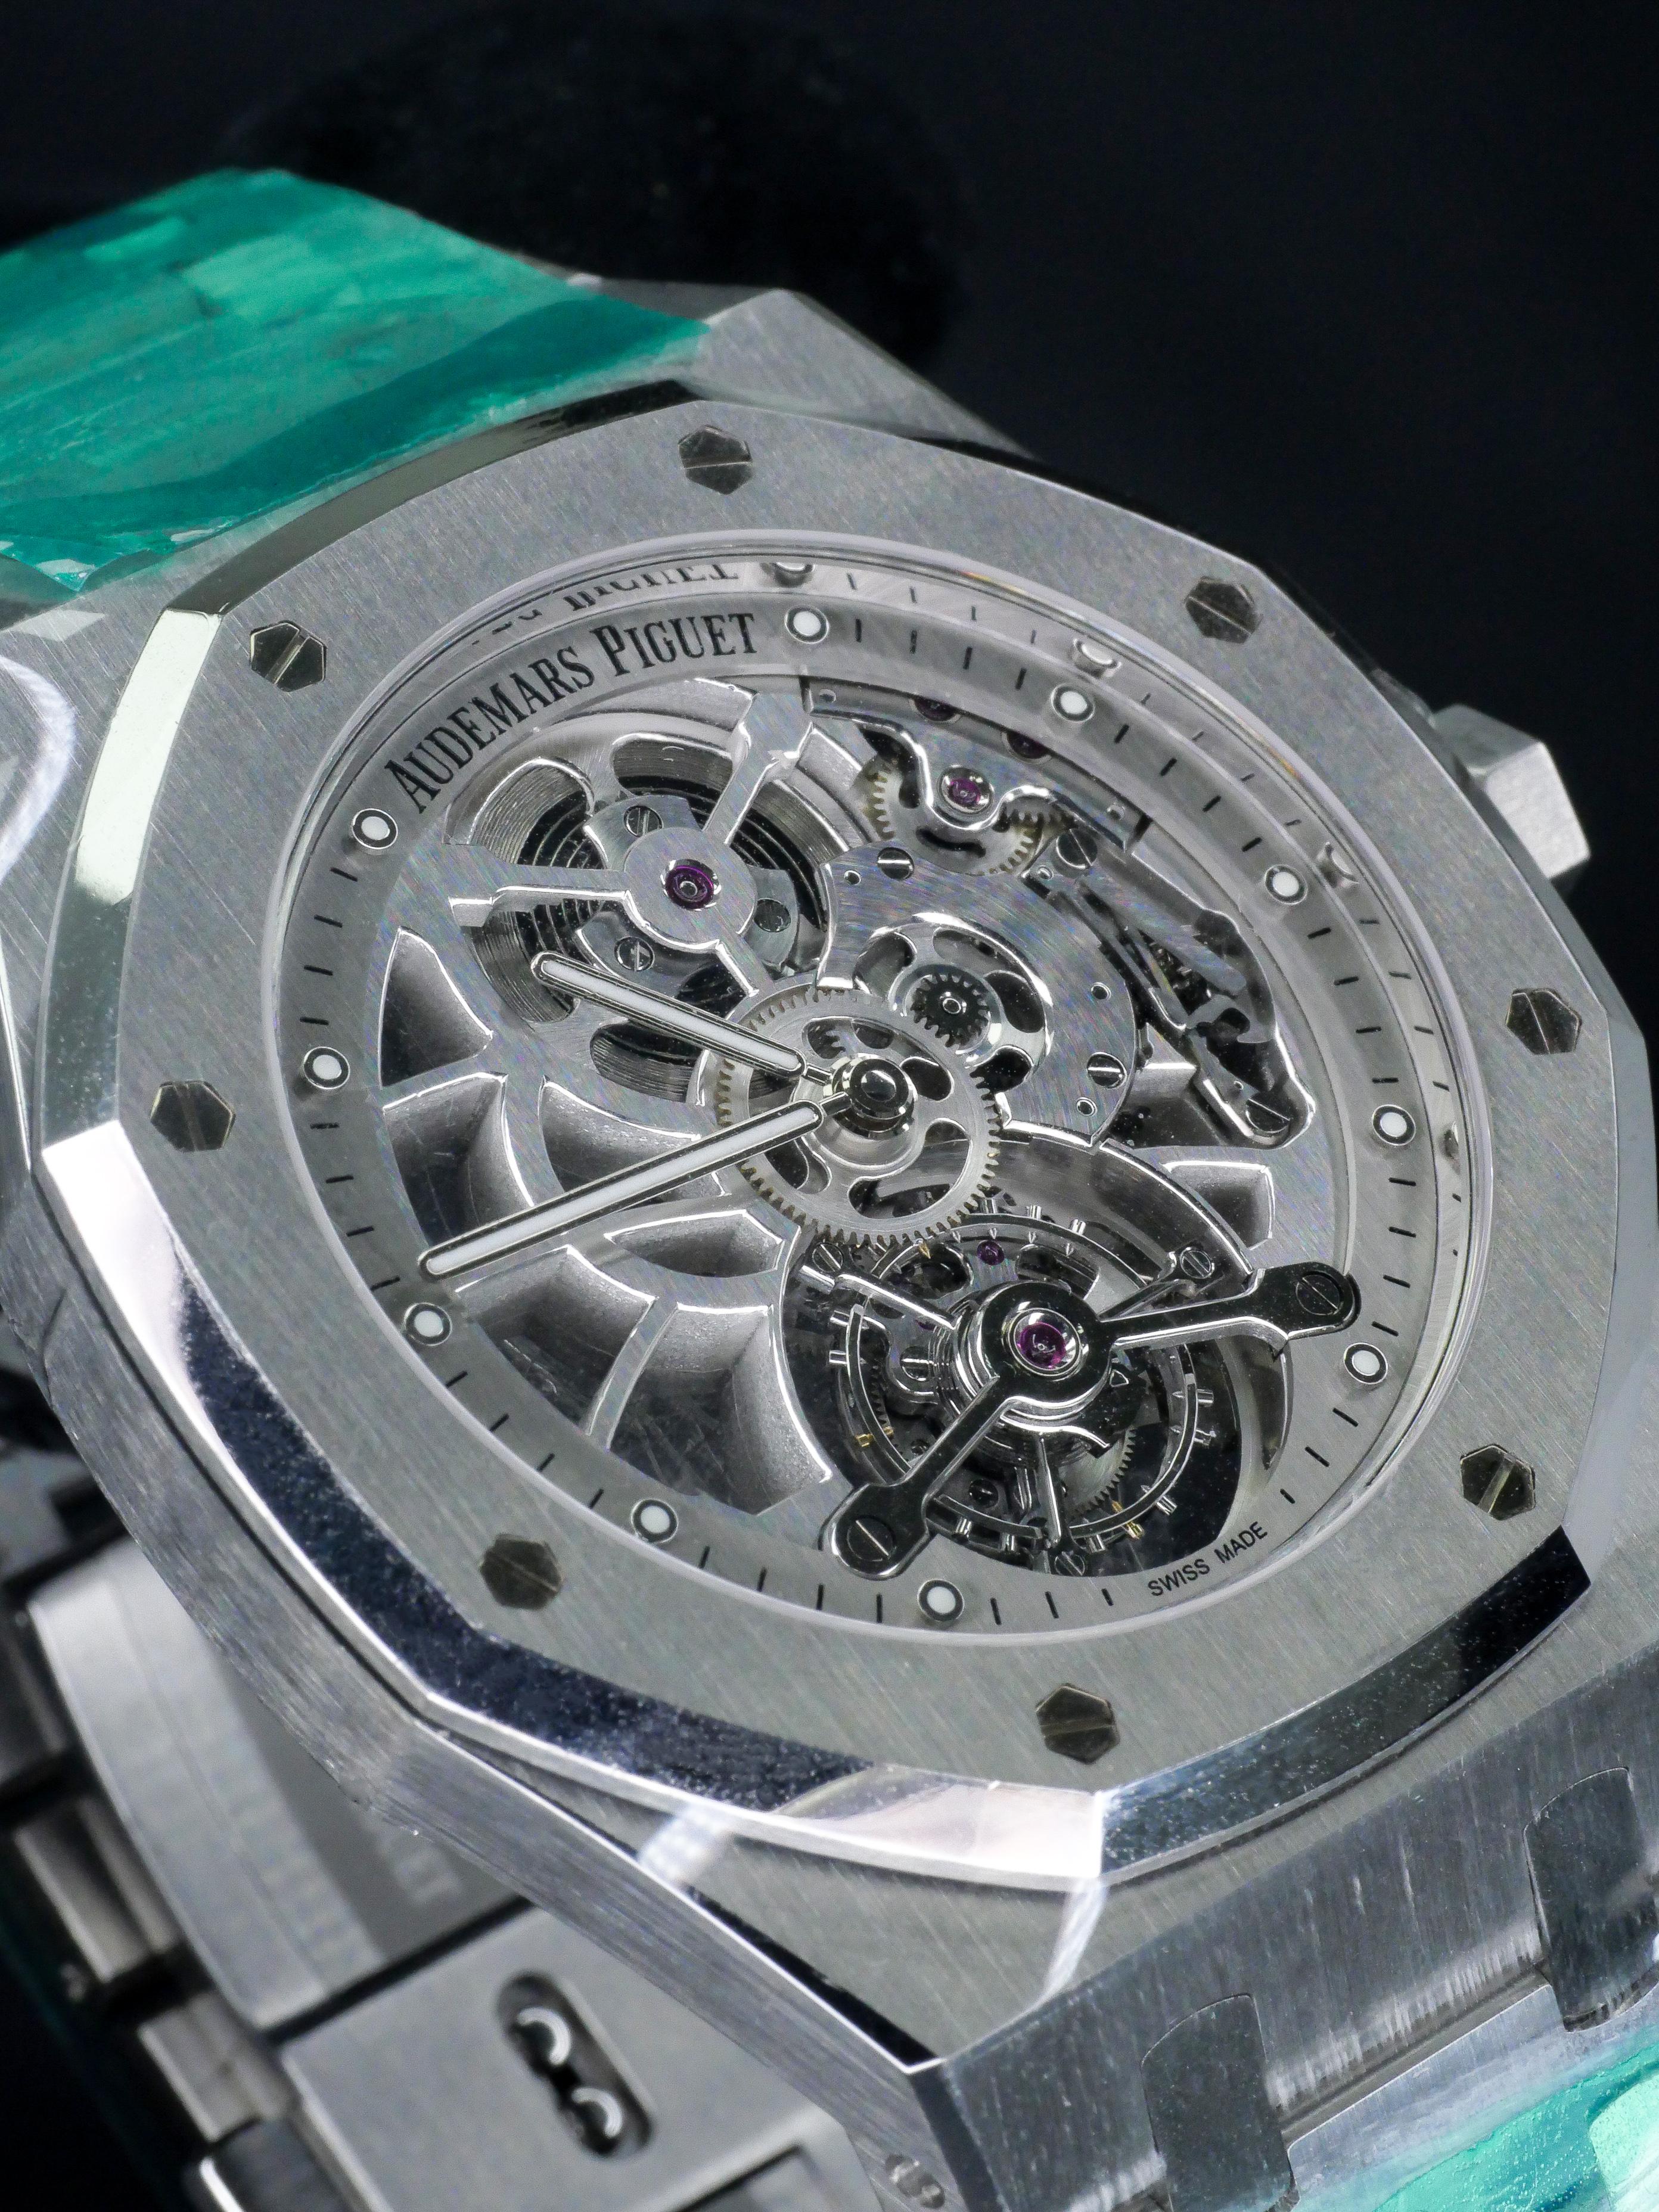 Audemars Piguet Royal Oak Tourbillon has a prestigious movement within an ultra-thin case 
A limited-edition showcase of haute horlogerie engineering and hand-finished aesthetics. The harmonious play of white rhodium tones sets it